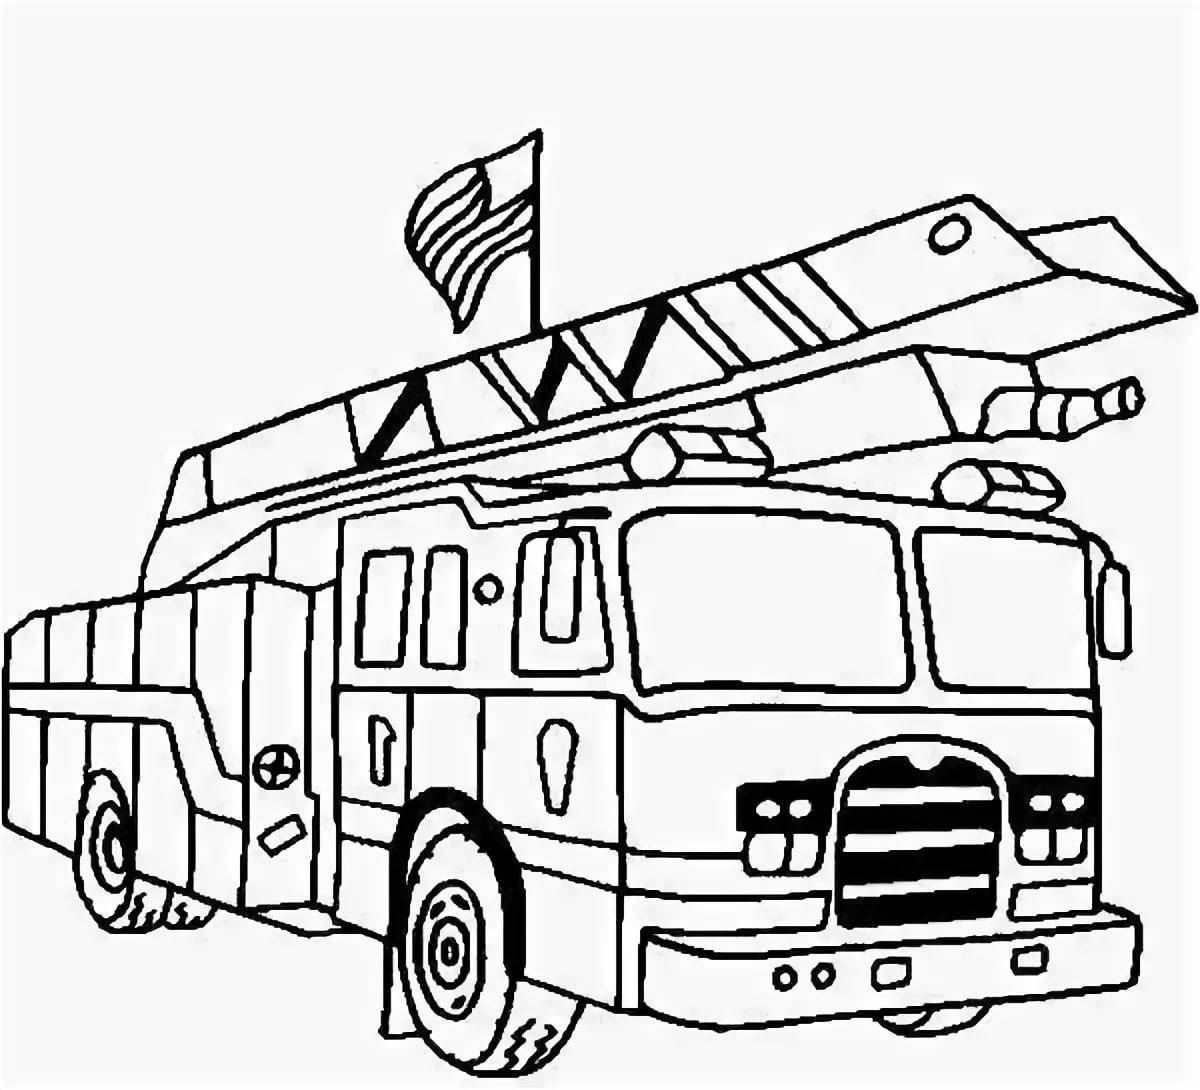 A fun fire truck coloring book for kids